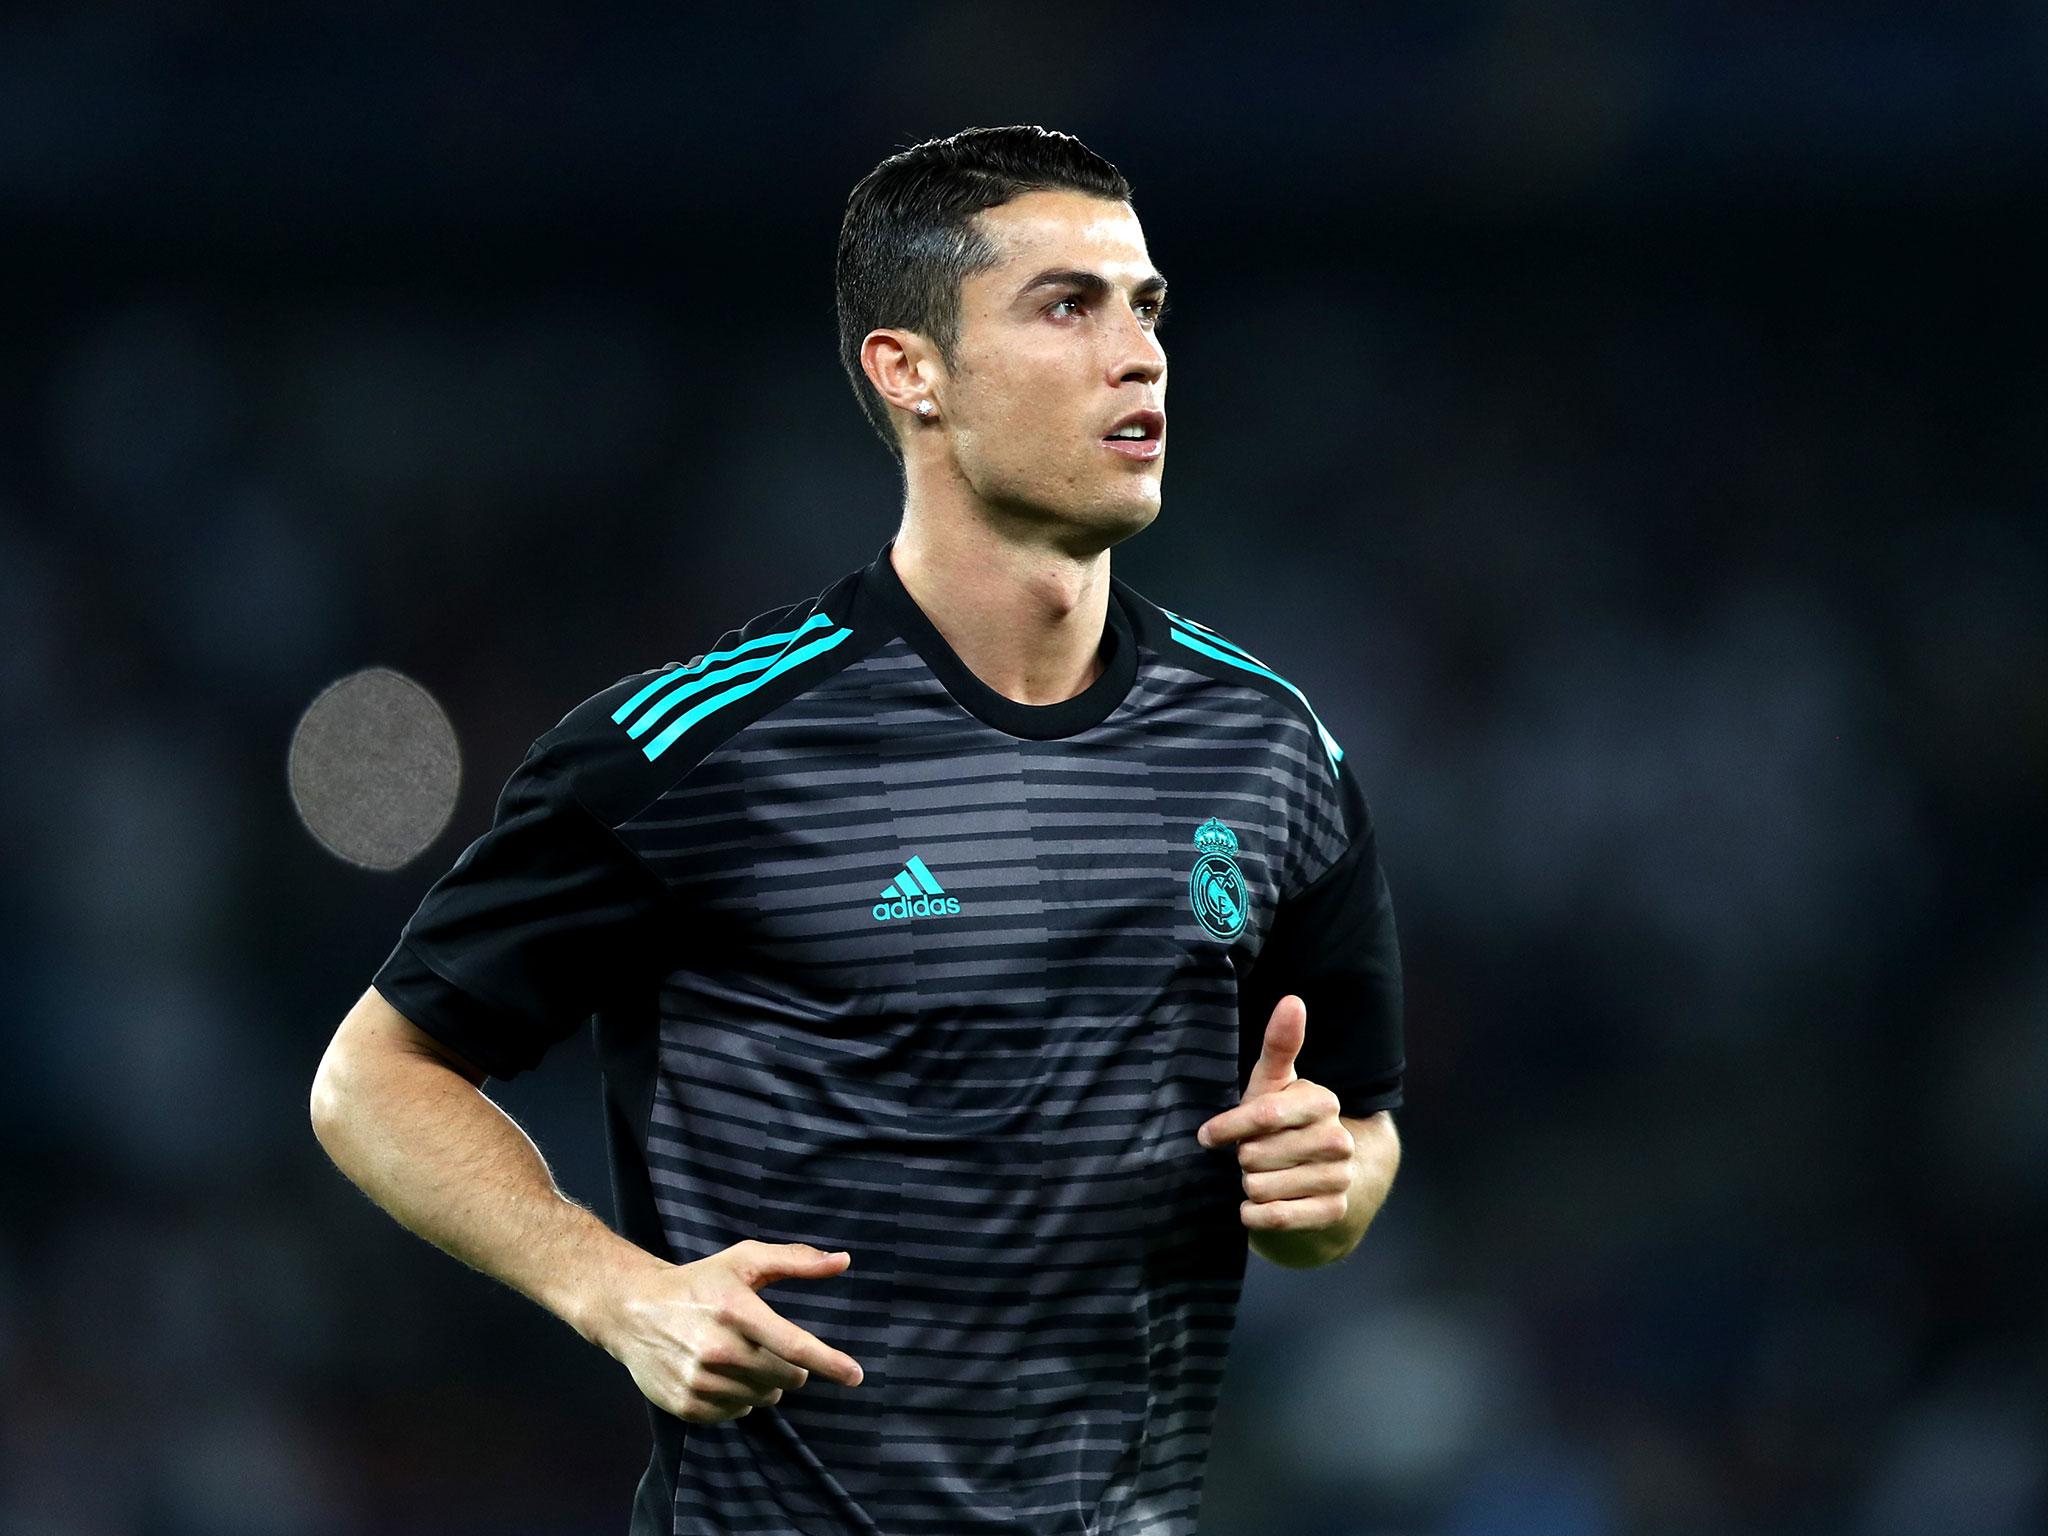 Head coach Zidane has urged Ronaldo to concentrate only on his game and not contract matters